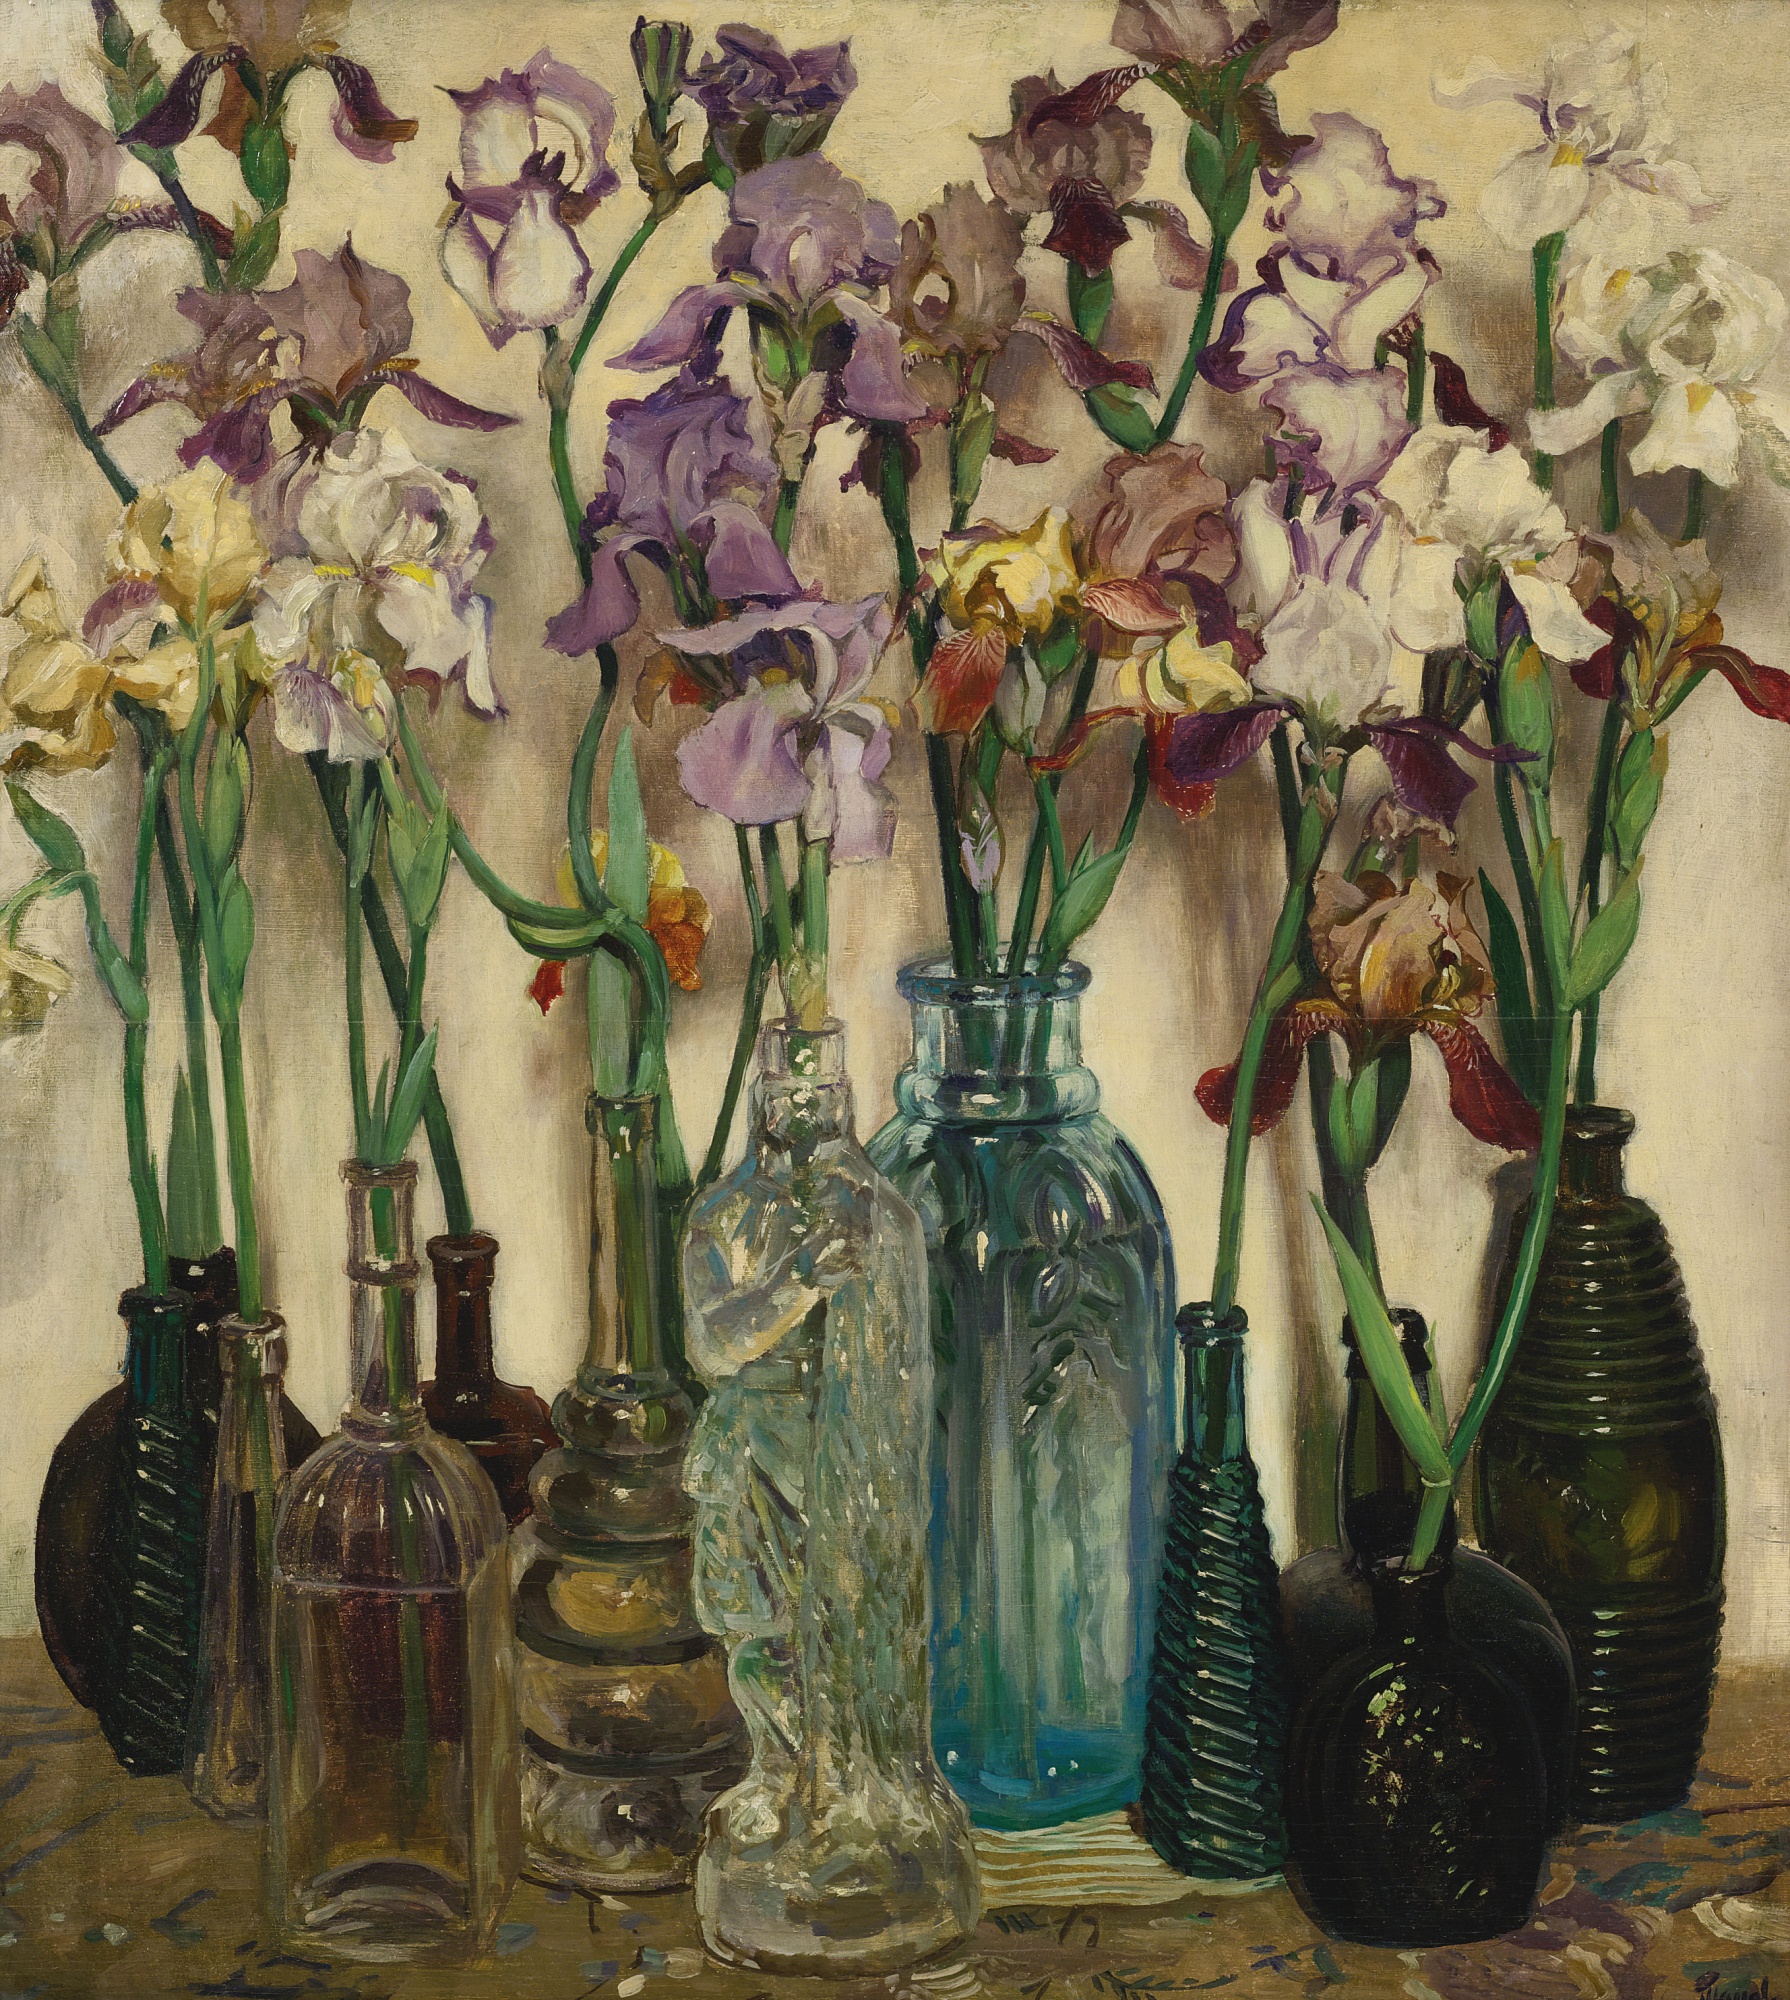 Rum Row by Frederick Judd Waugh - 1922 - 82.2 x 73.7 cm private collection